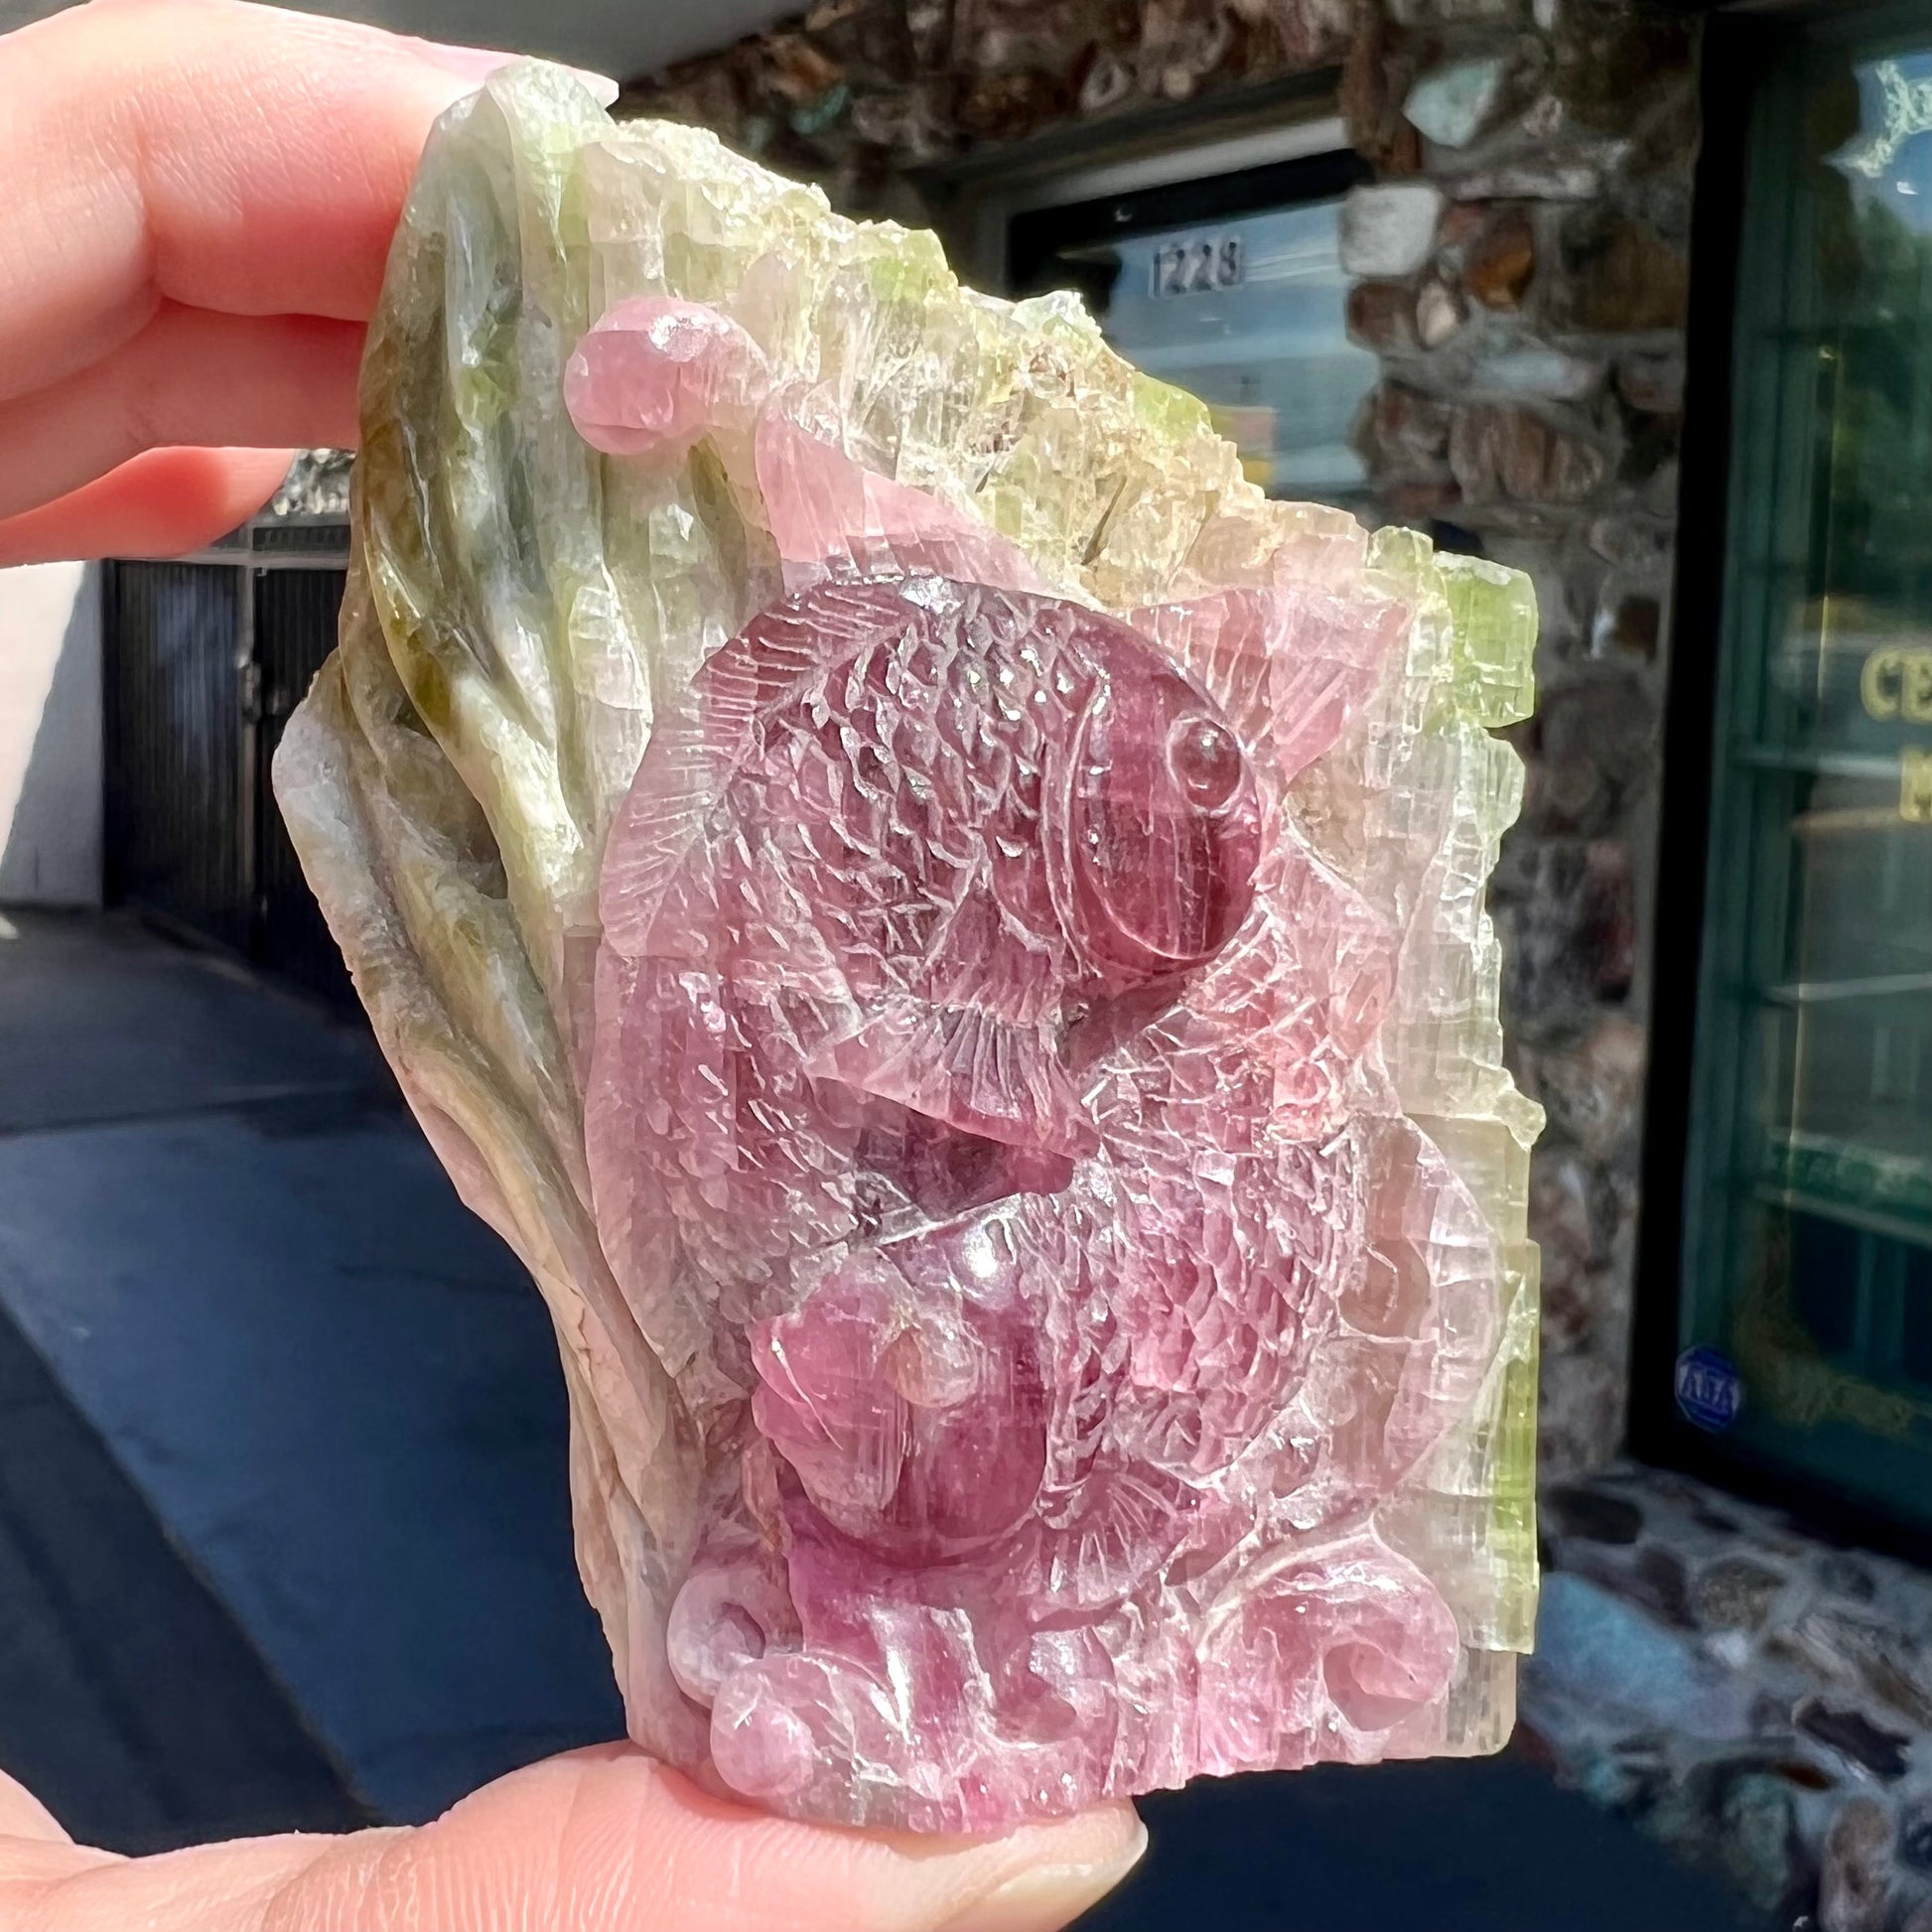 A stone carving of two fish swimming together carved from a watermelon tourmaline crystal conglomerate by artist, Ronald Stevens.